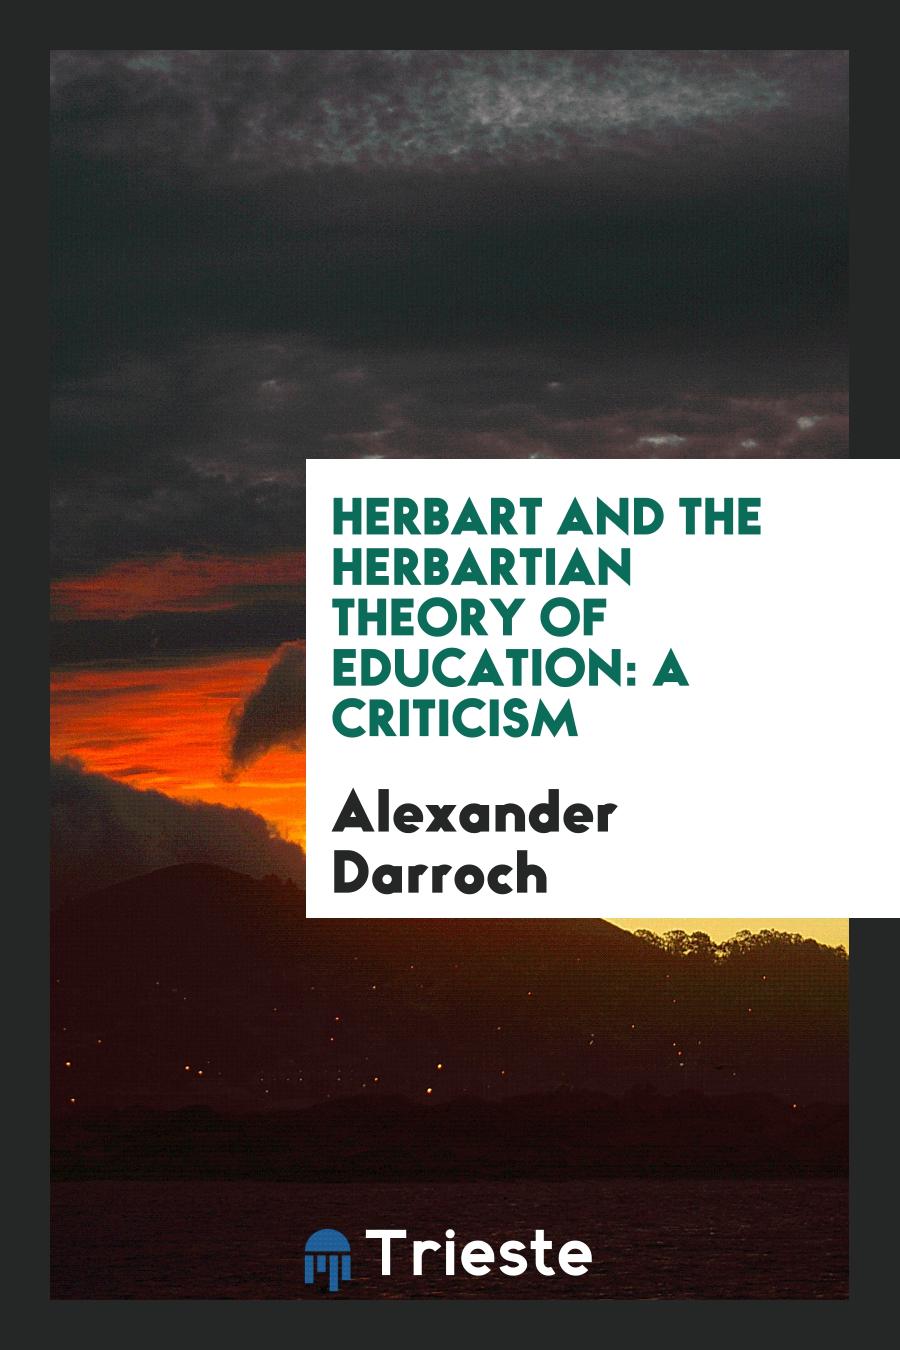 Herbart and the Herbartian Theory of Education: A Criticism